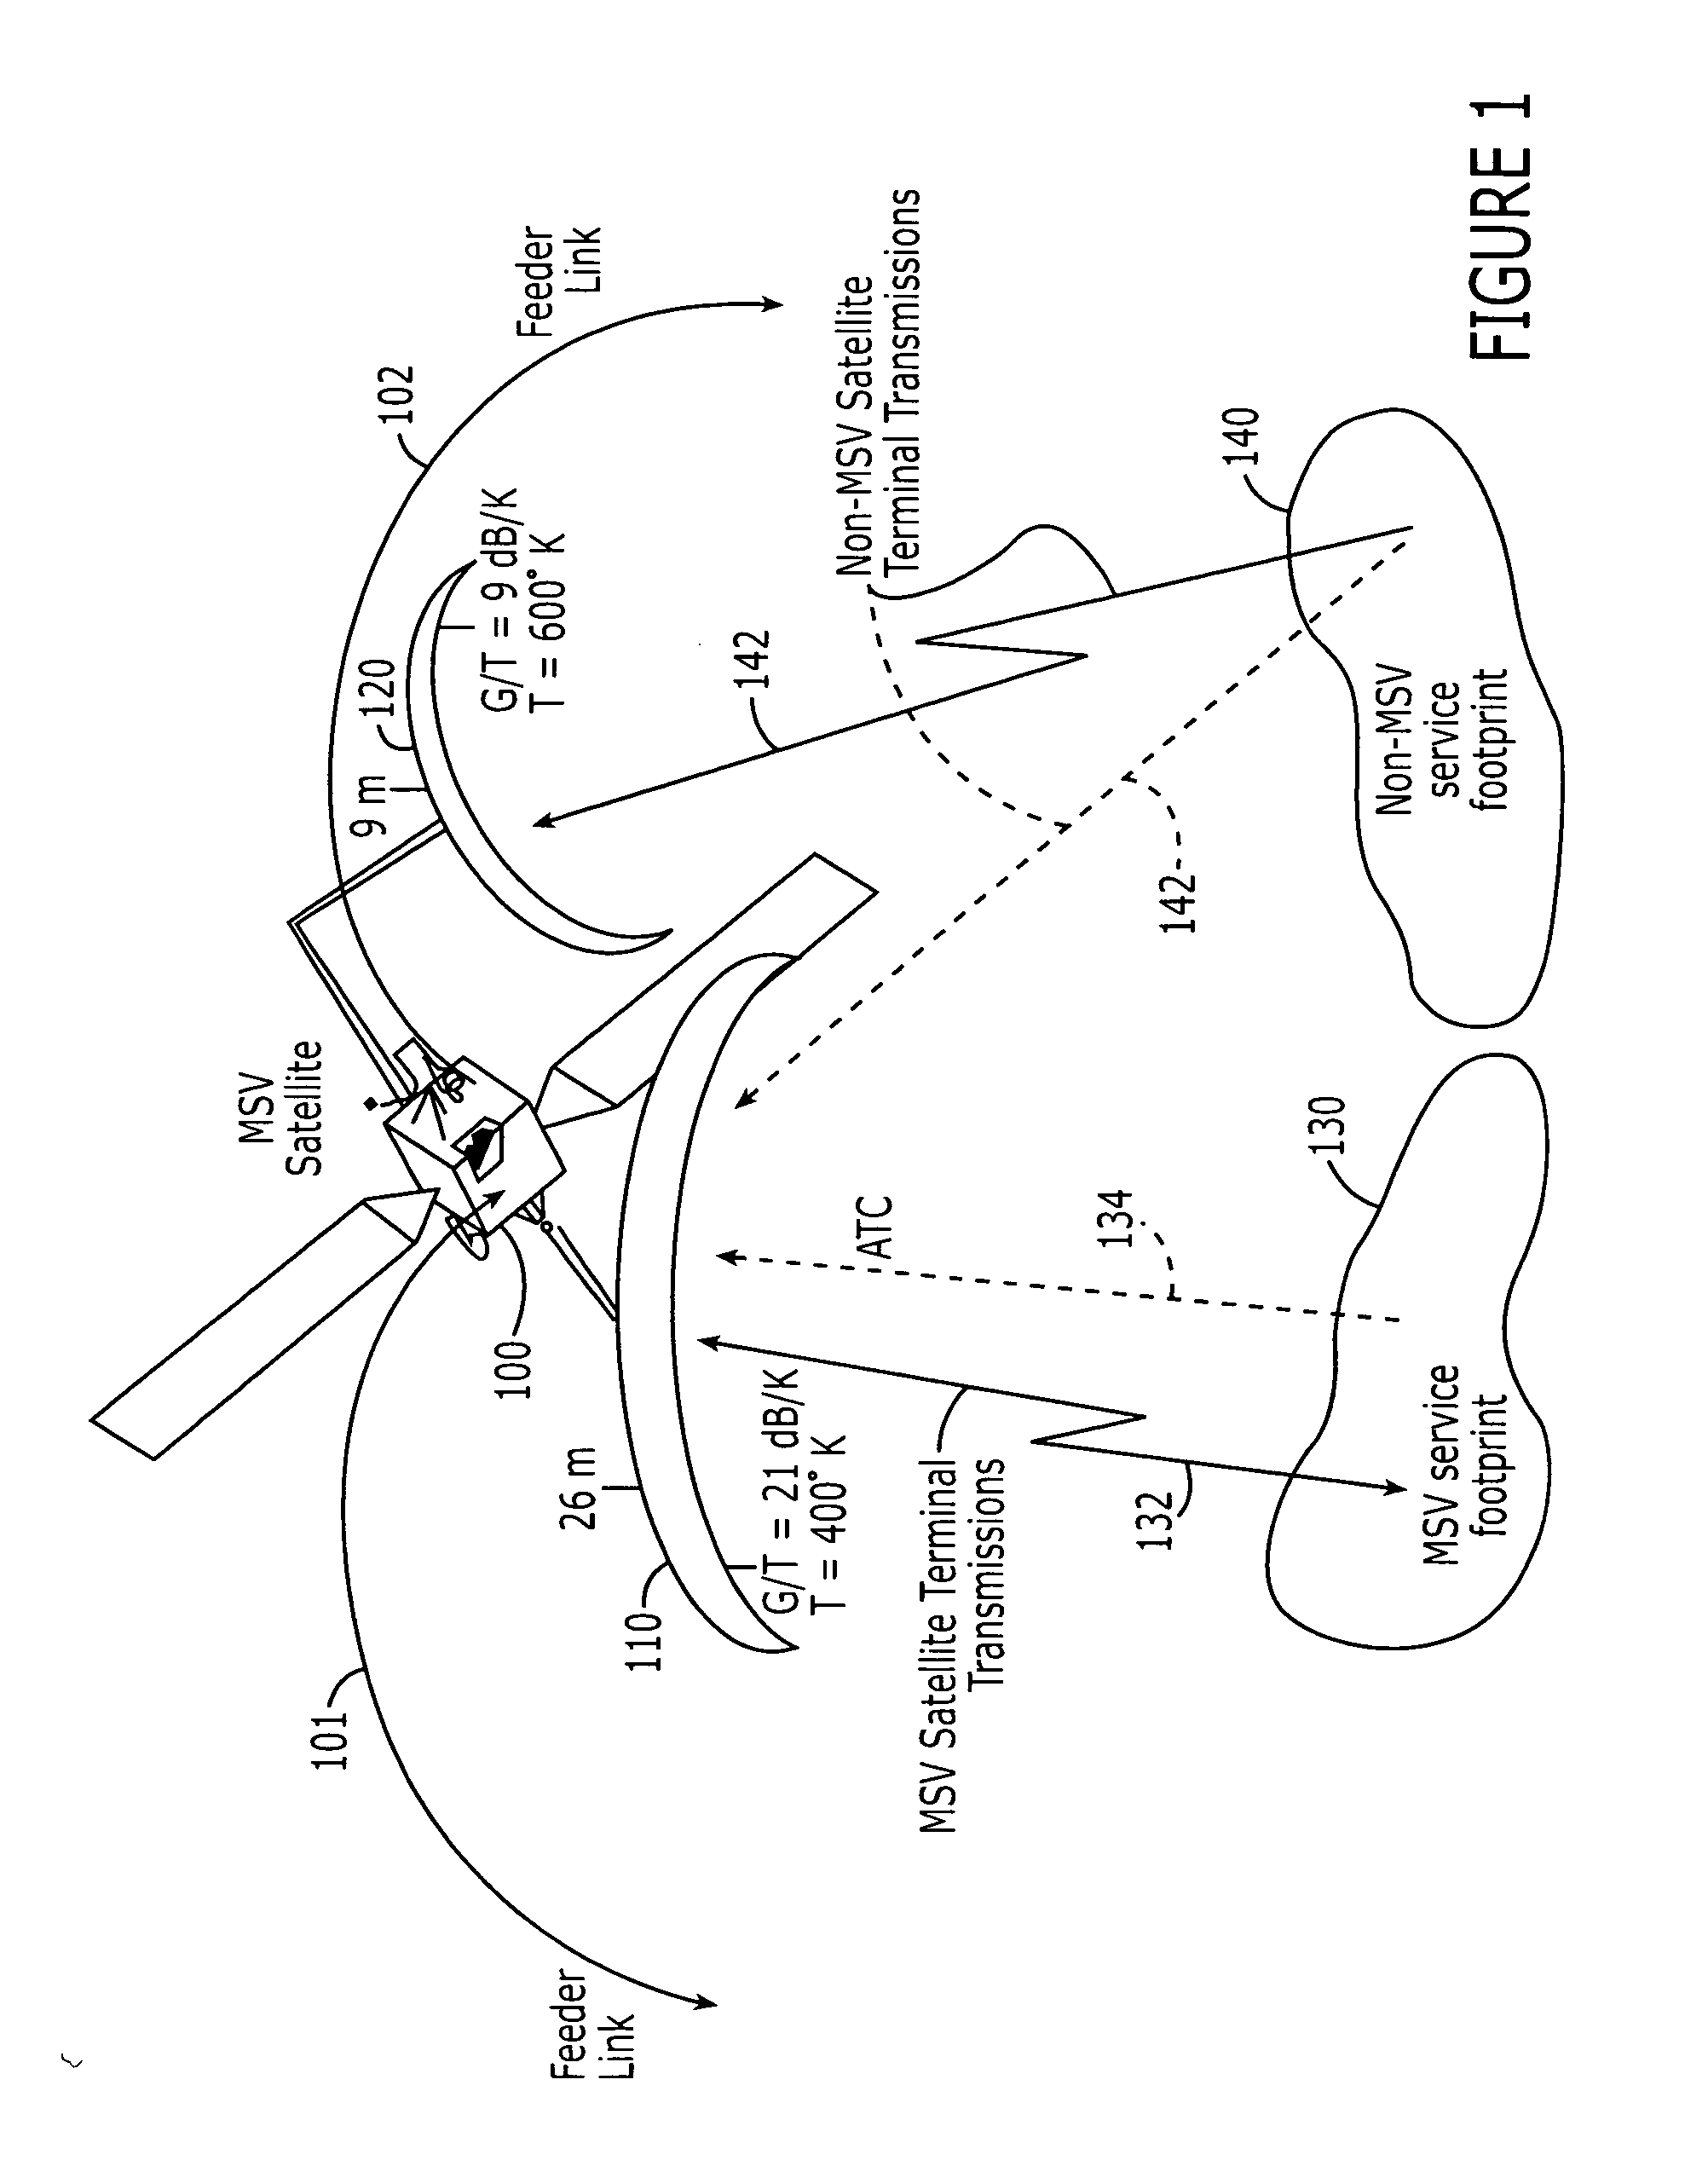 Additional intra-and/or inter-system interference reducing systems and methods for satellite communications systems